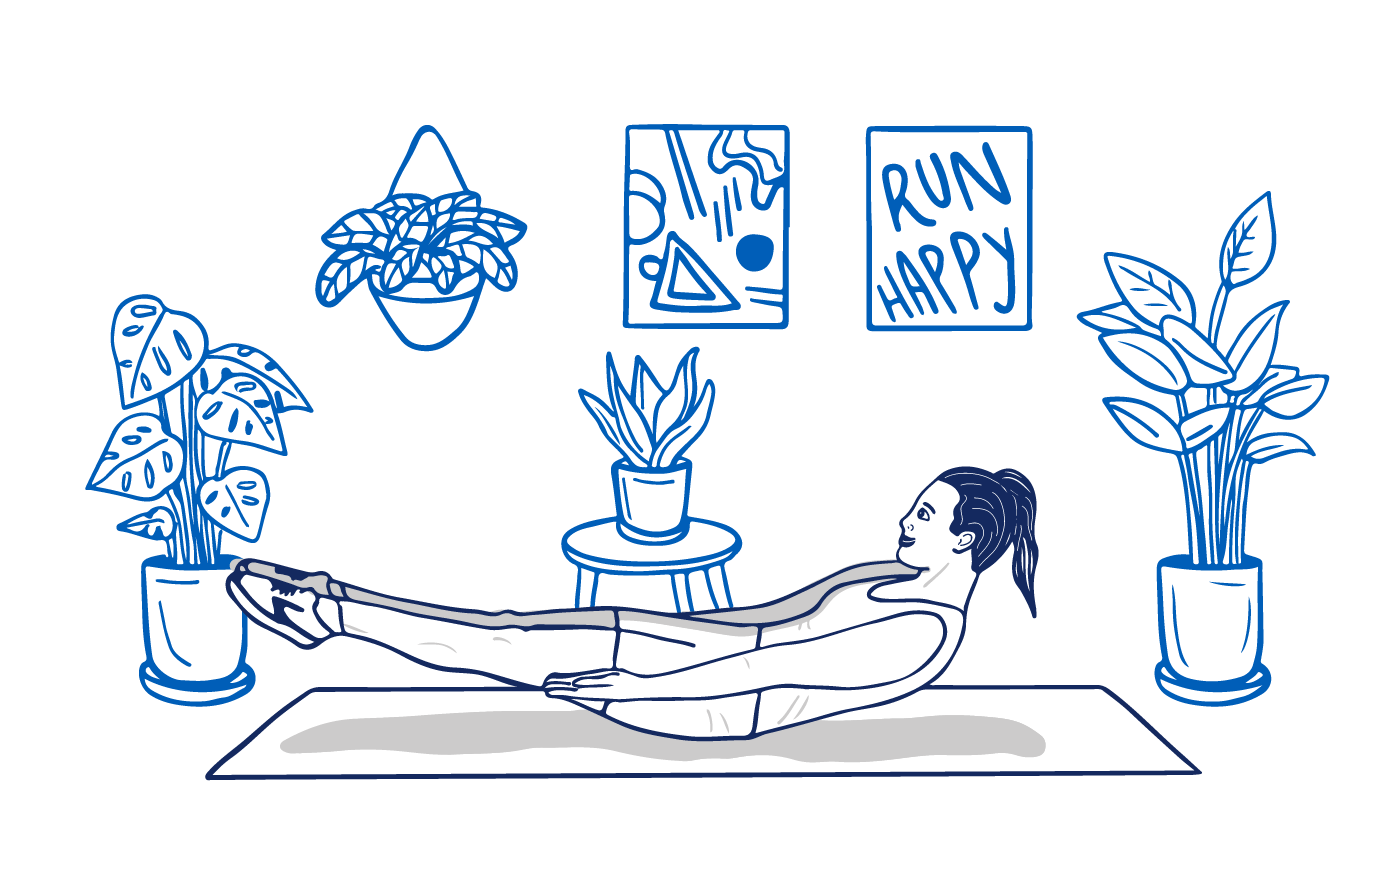 An illustration of a woman doing V-ups on a yoga mat in her living room surrounded by houseplants, an abstract art painting, and a poster that says “Run Happy.”